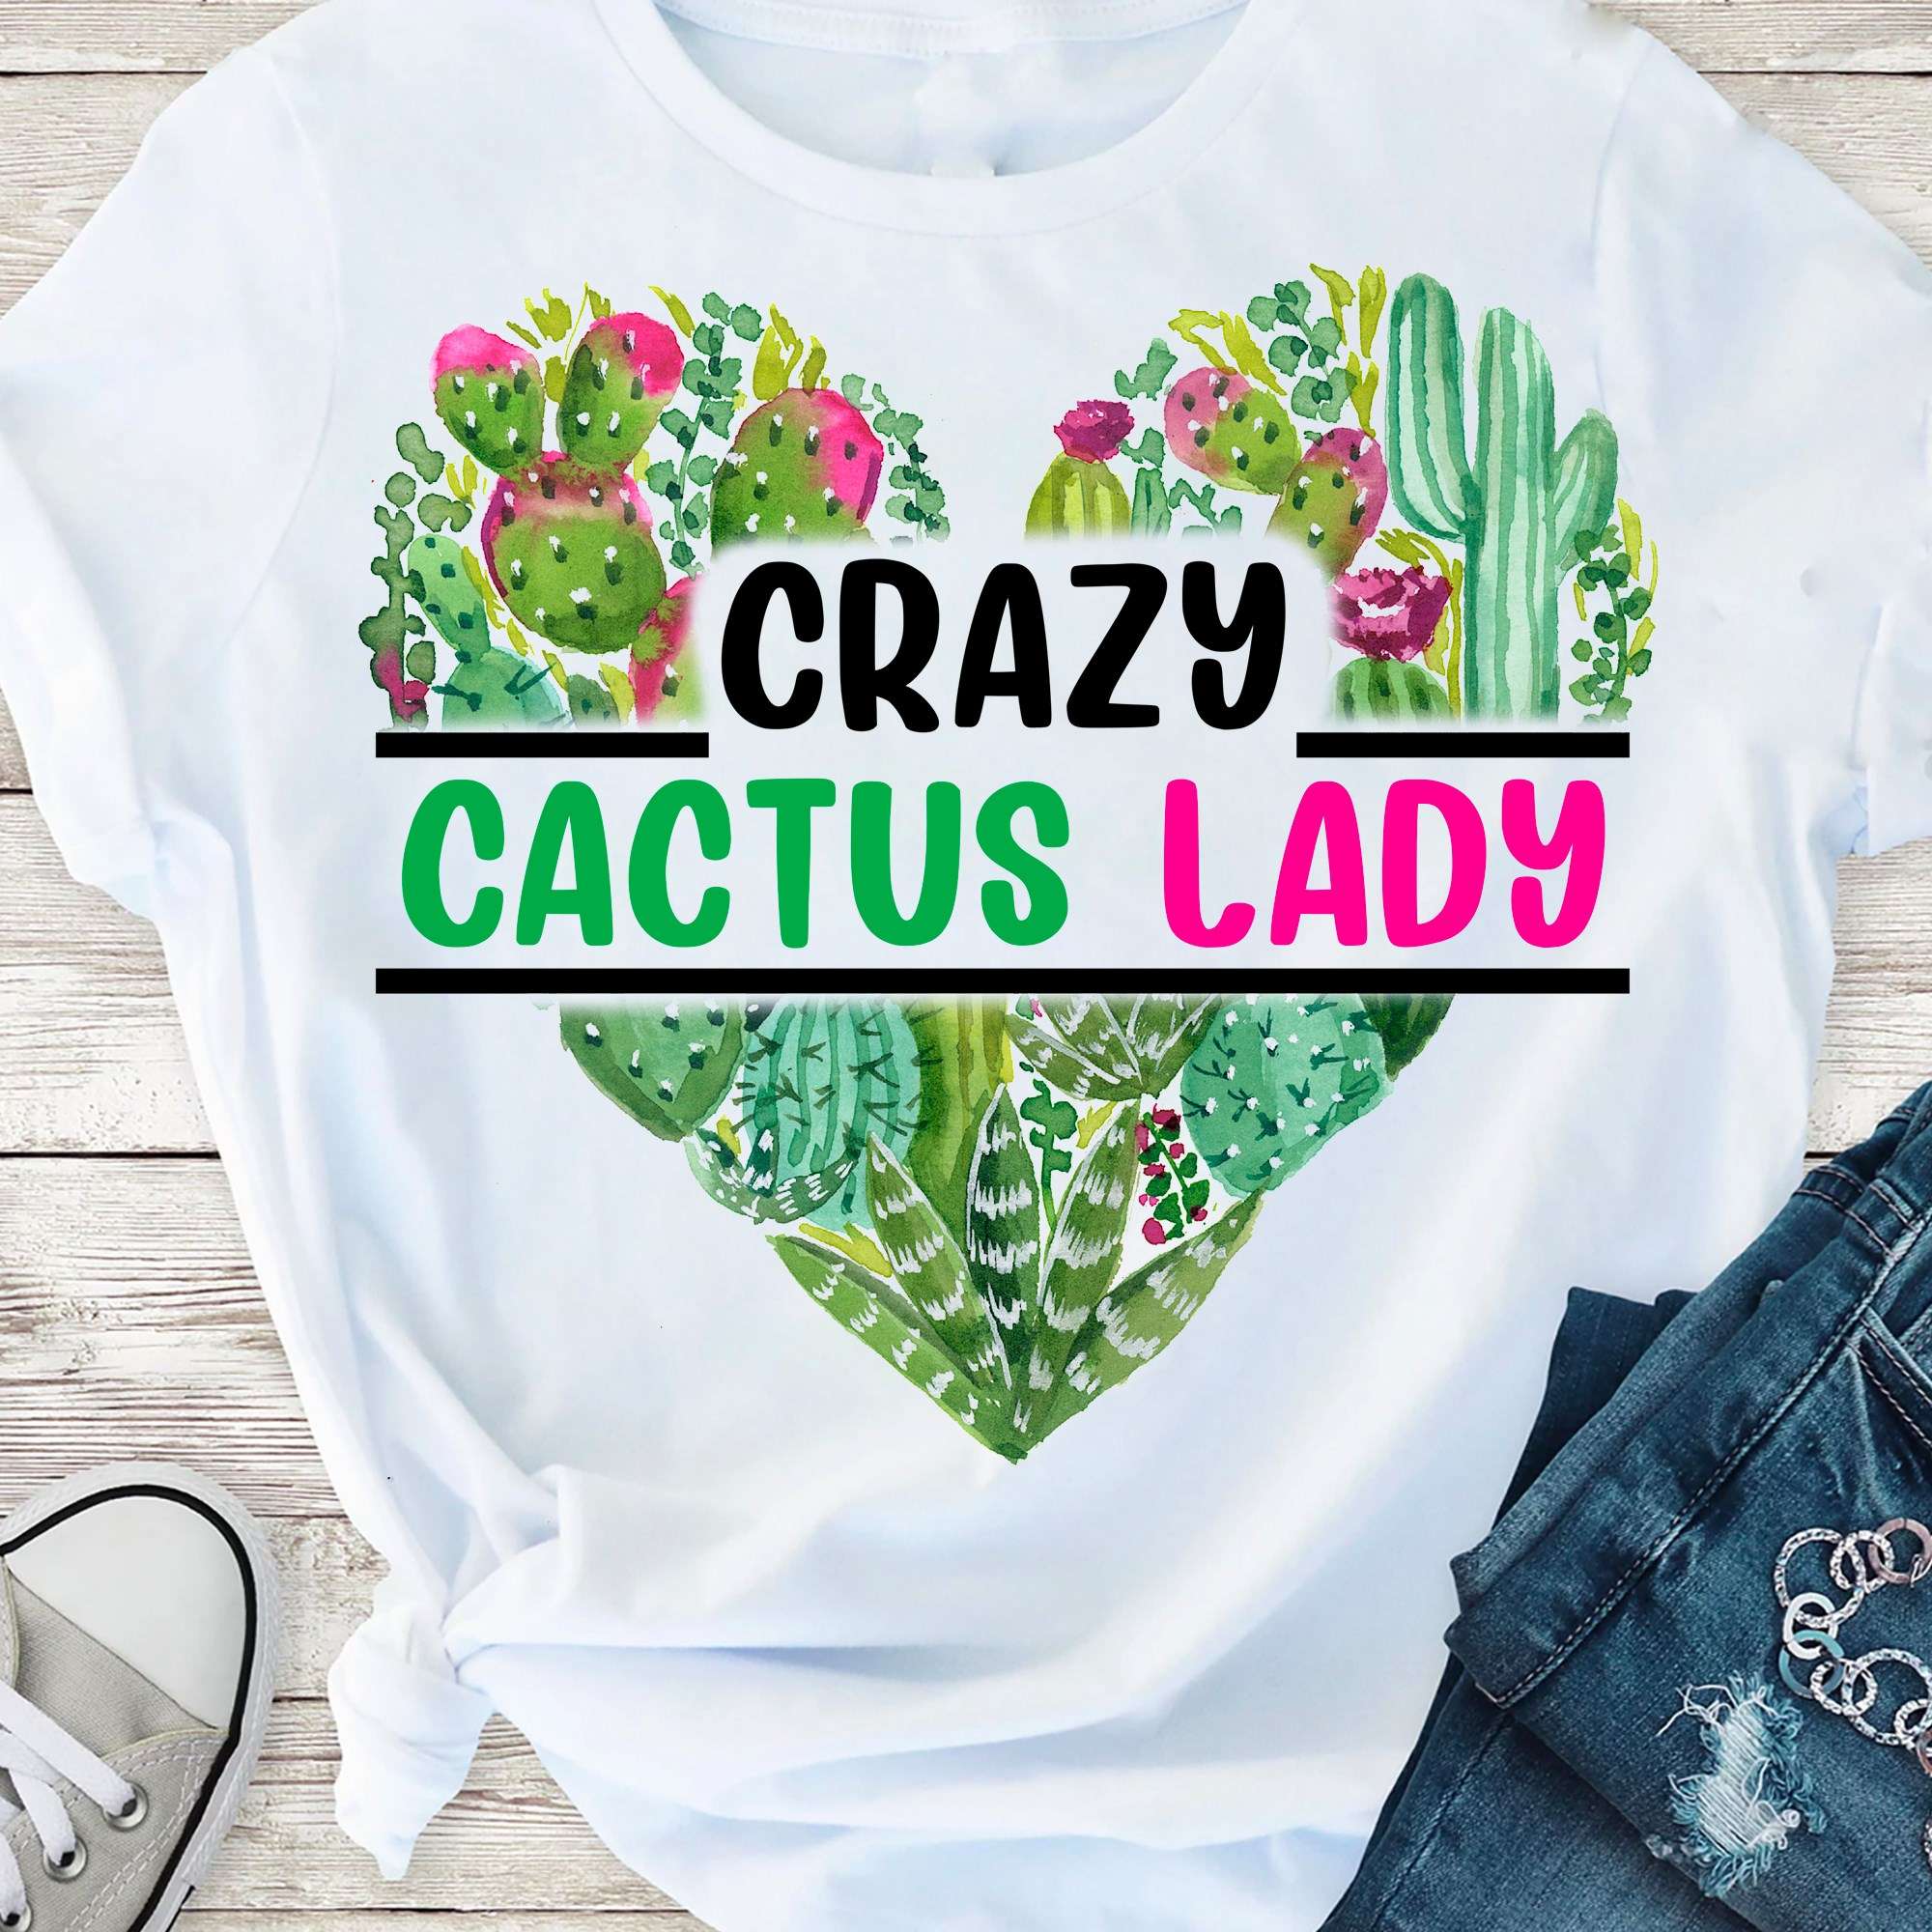 Crazy Cactus Lady - Gift for cactus lady, Lady loves cactus